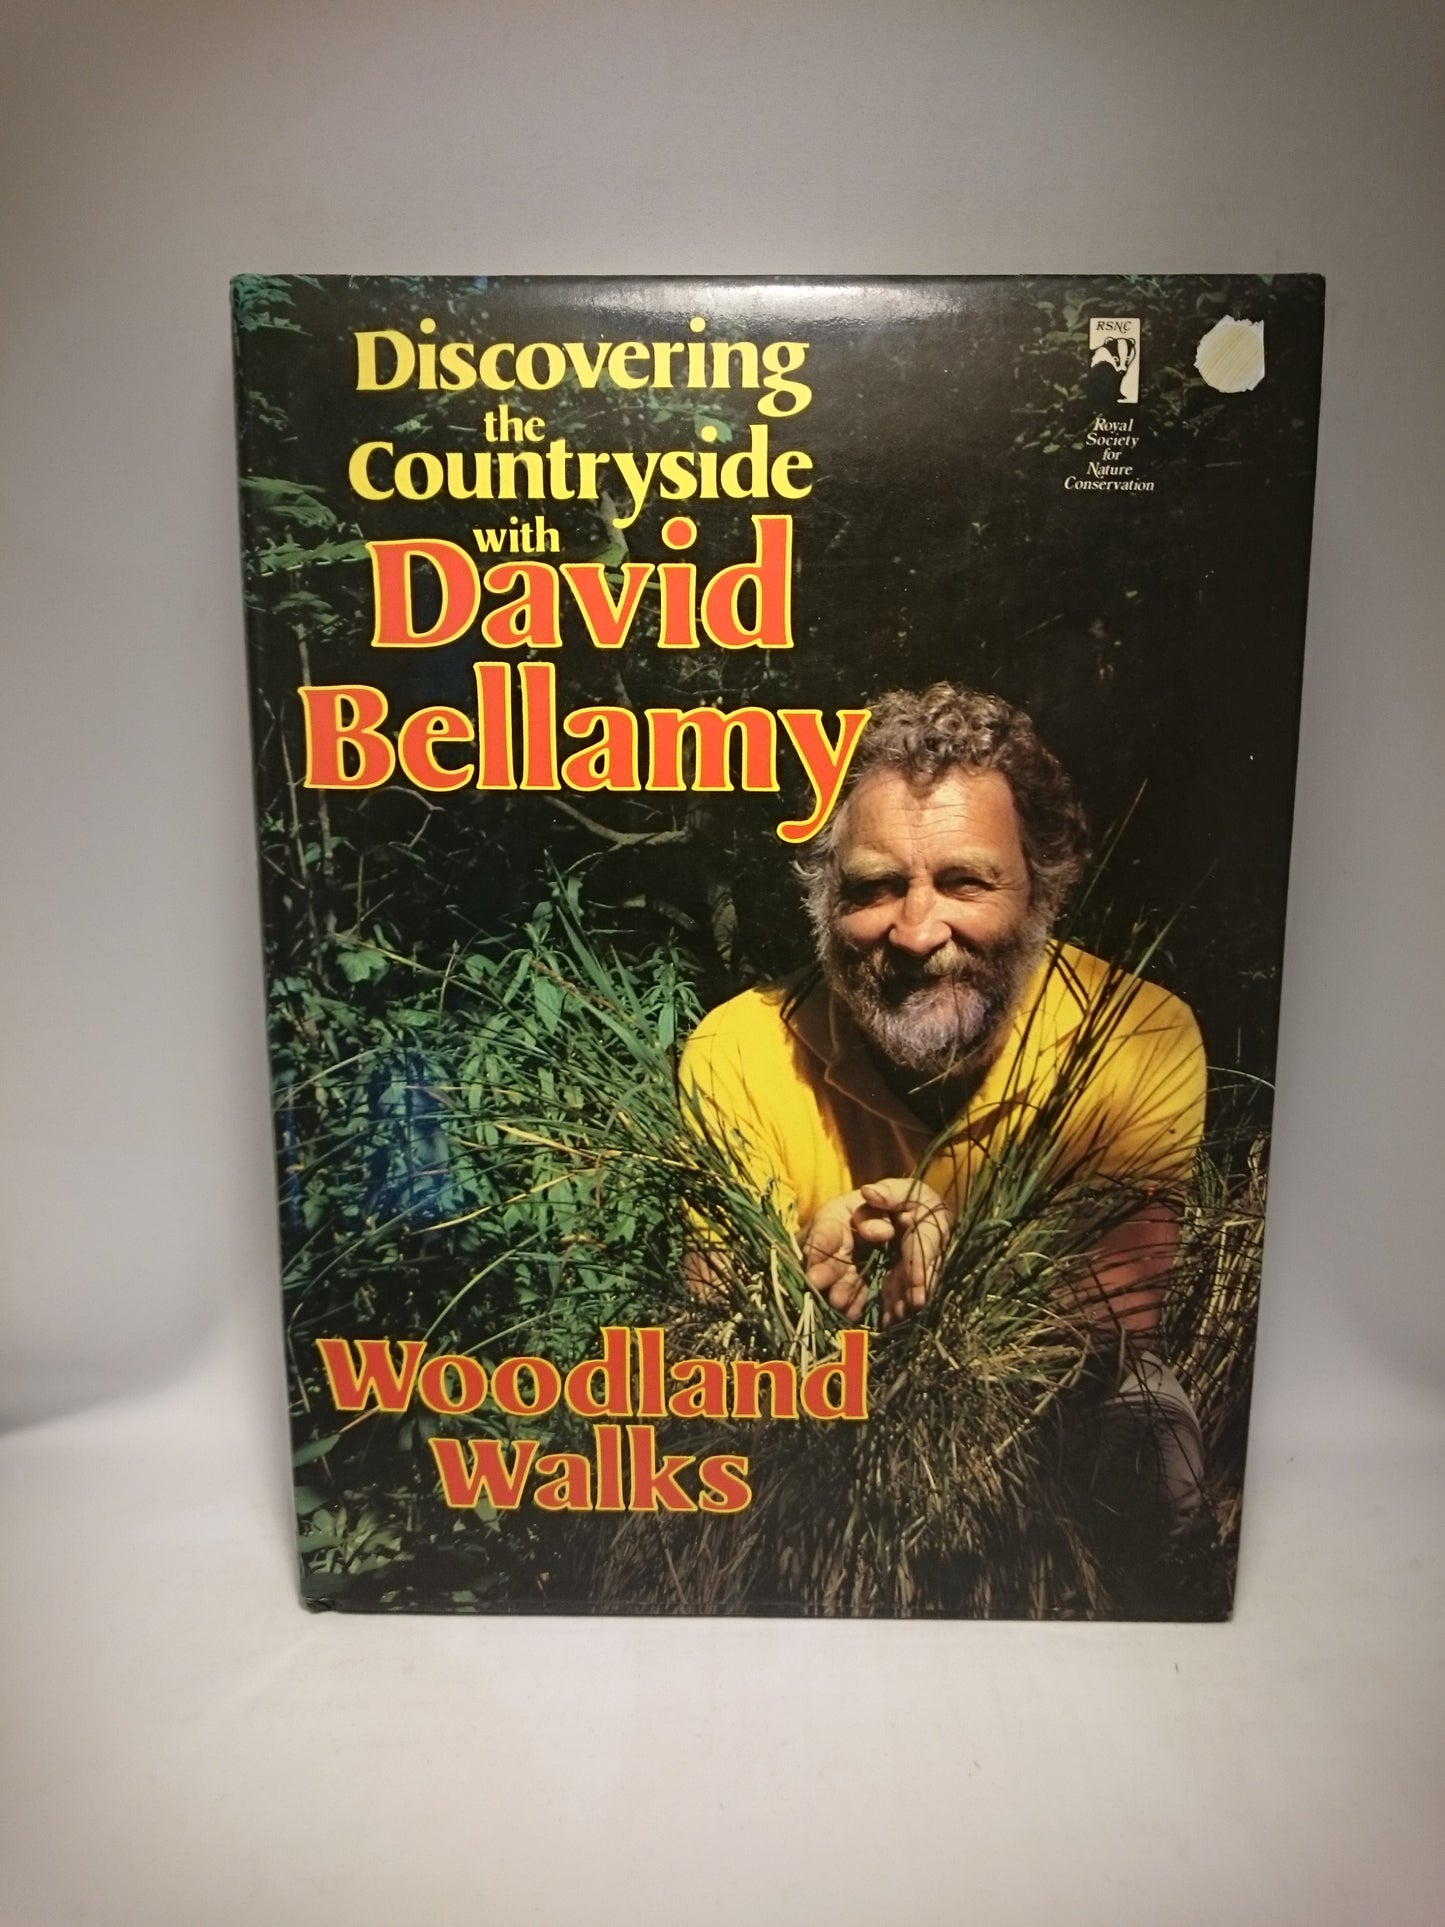 Discovering the Countryside with David Bellany